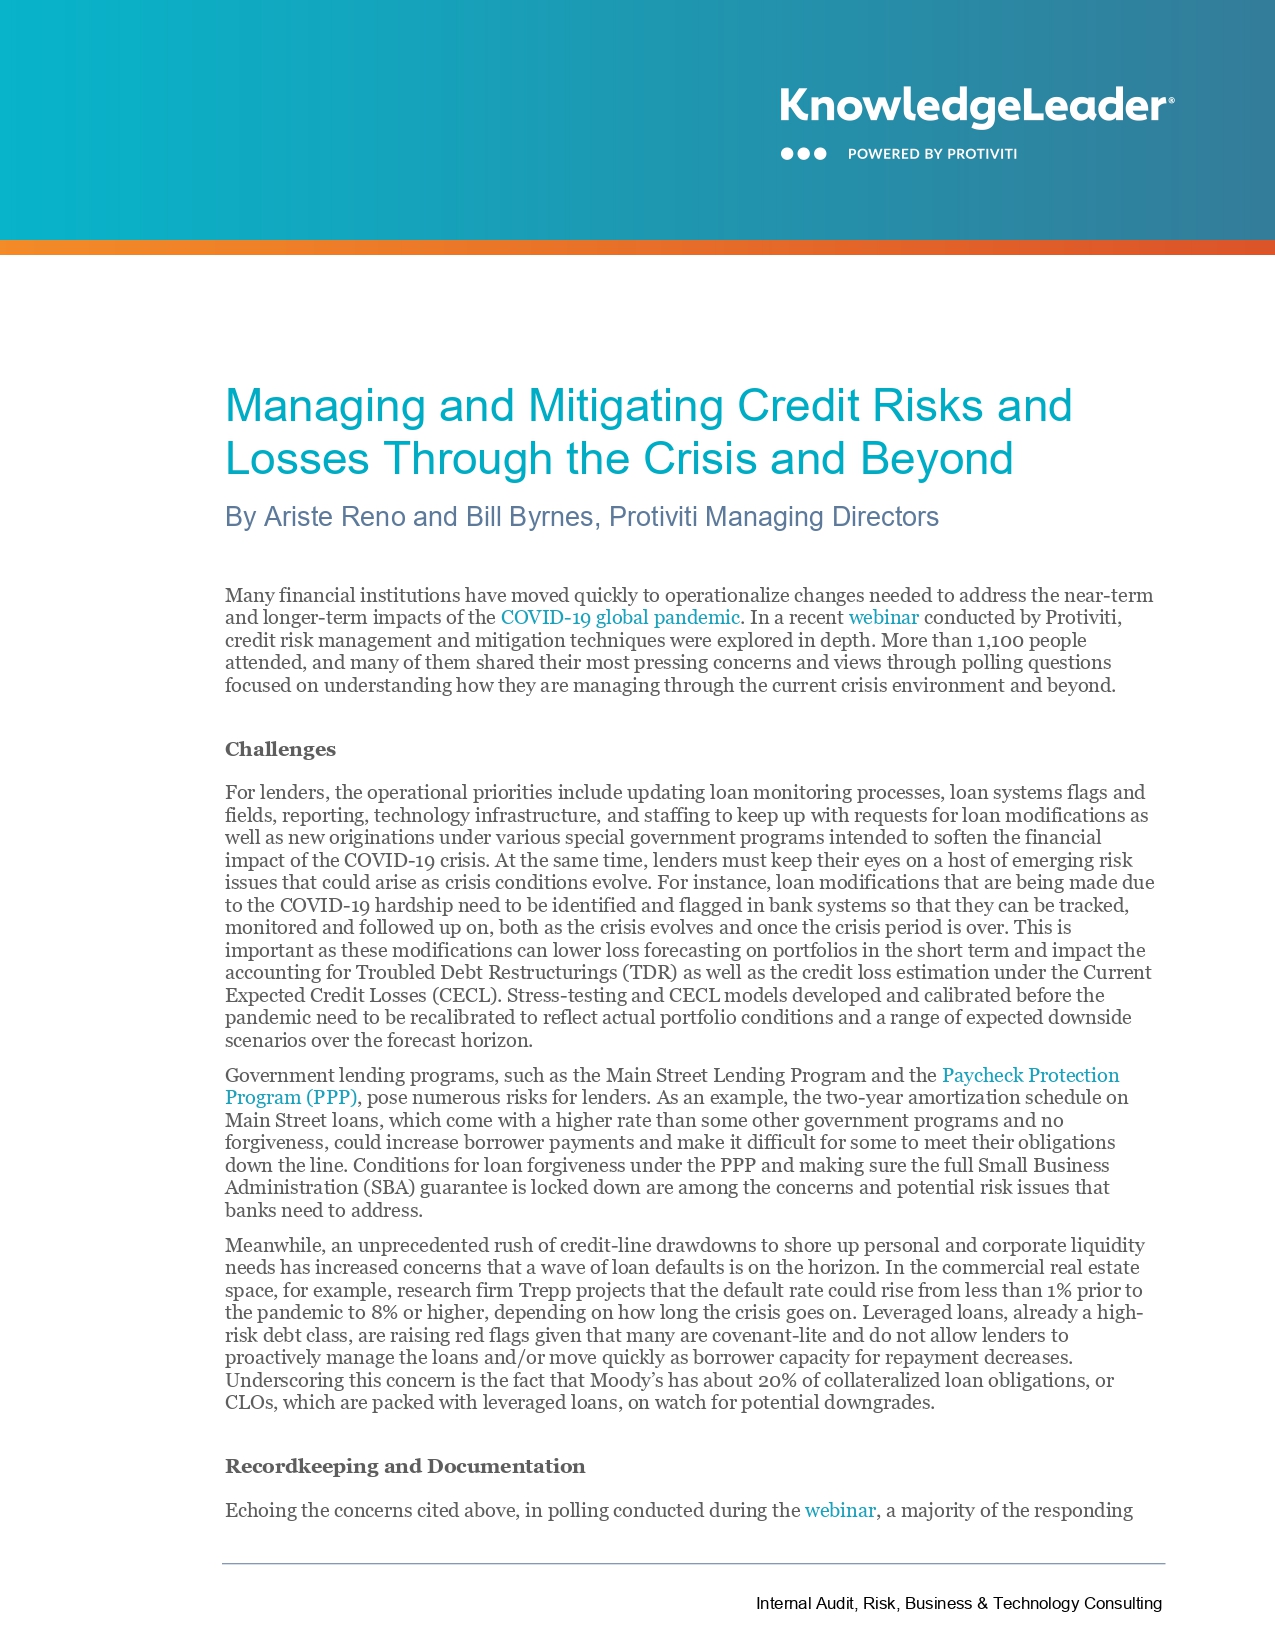 Screenshot of Managing and Mitigating Credit Risks and Losses Through the Crisis and Beyond